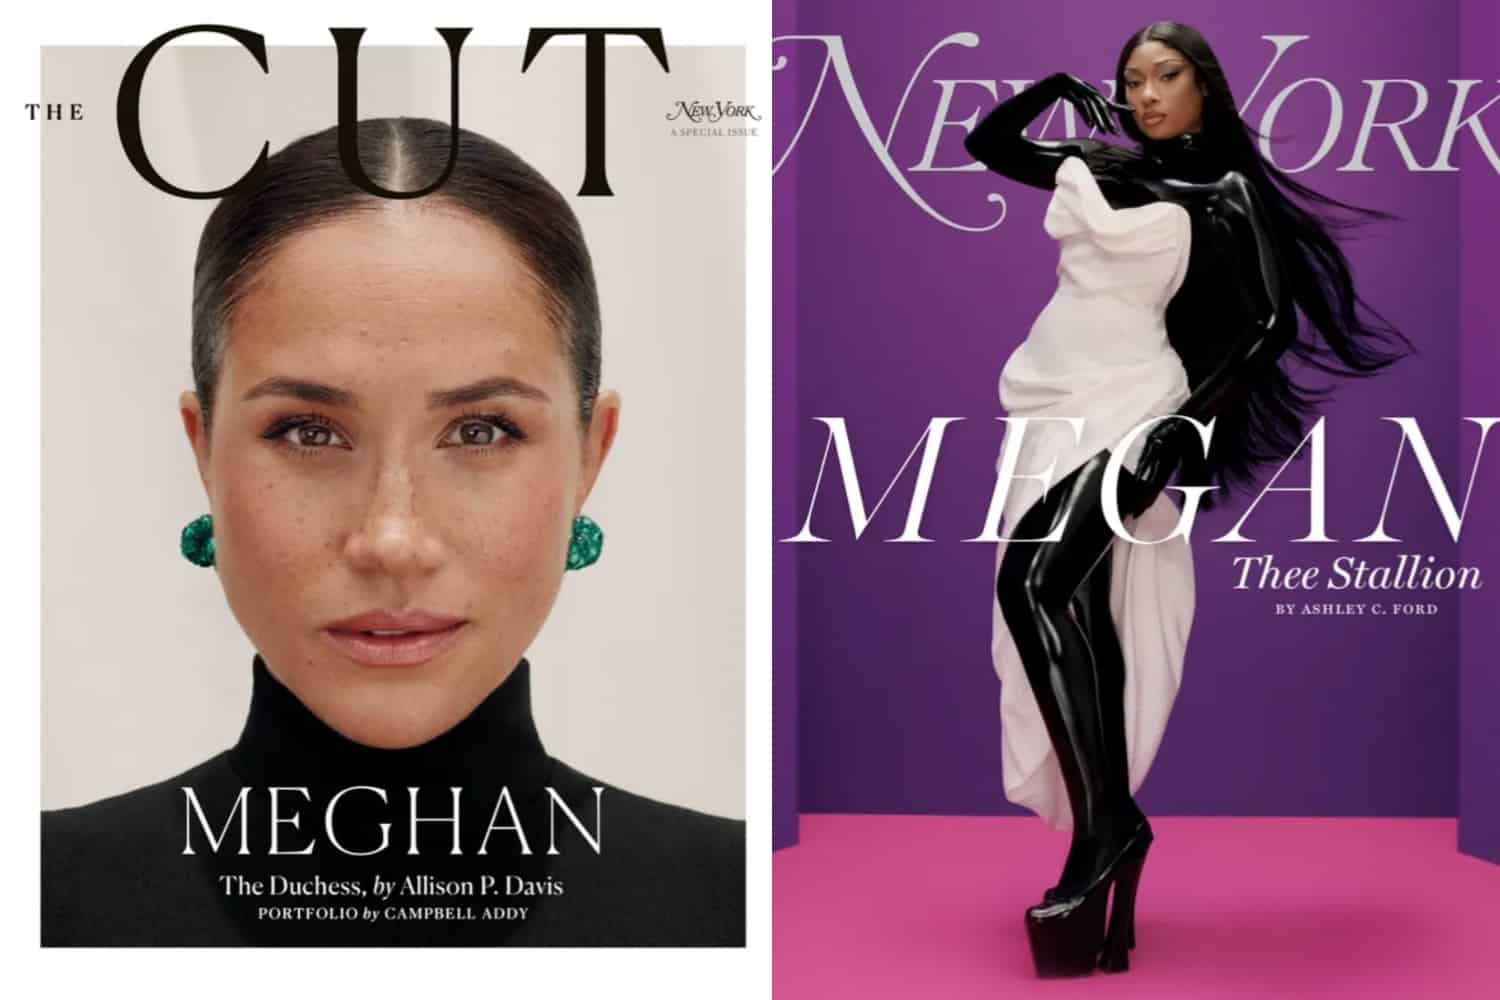 Daily News: Meghan Markle’s First Post-Palace Cover, Jacquemus Weds, NYFW Buzz, And More!